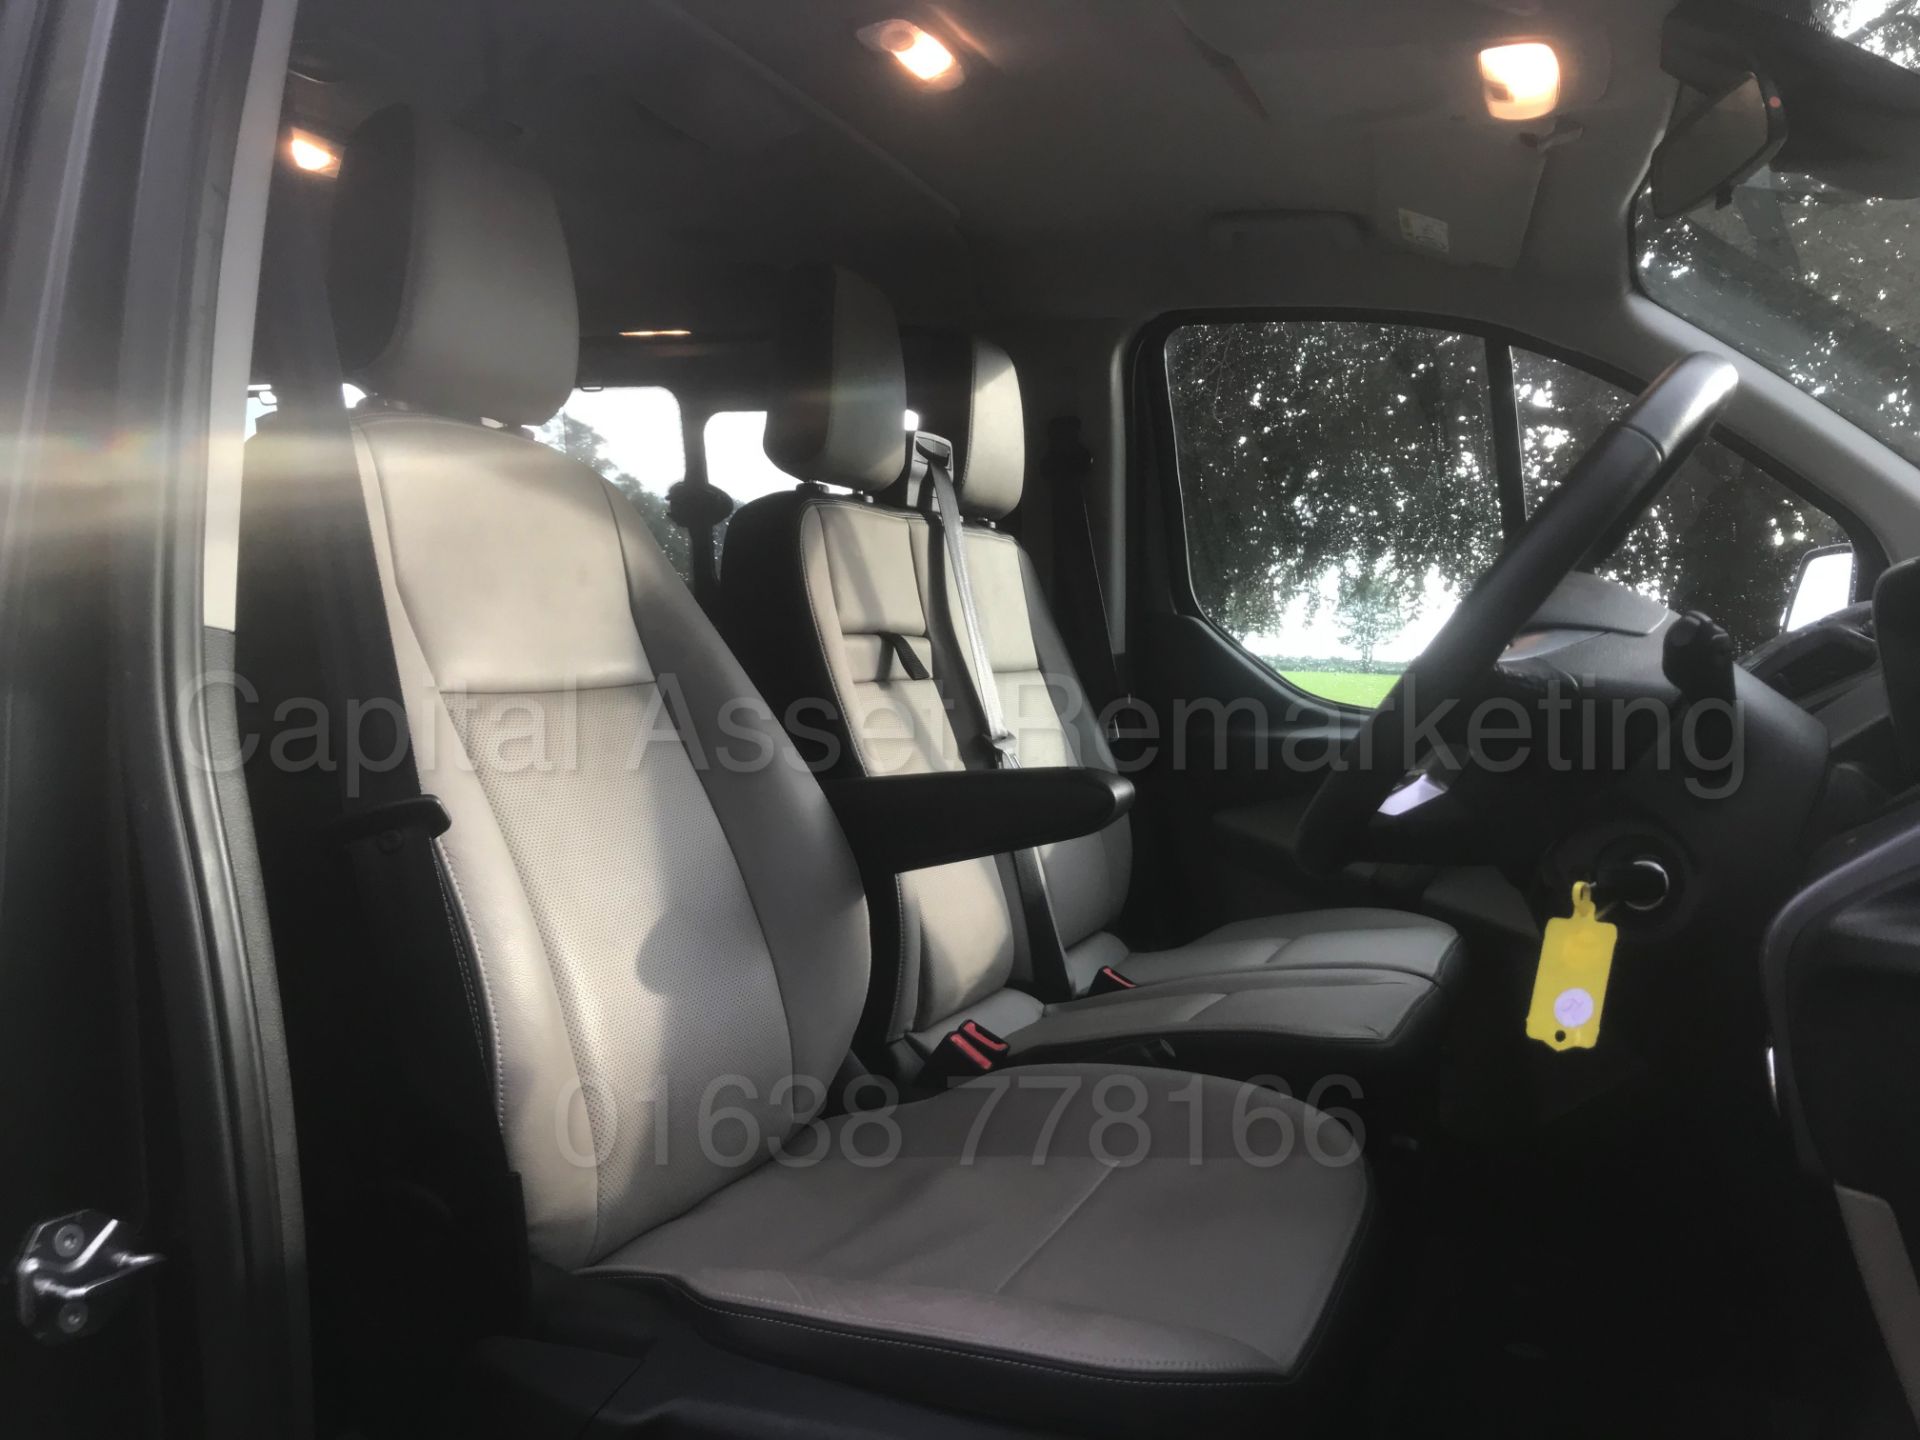 FORD TRANSIT 'TOURNEO' *TITANIUM EDITION* (2018) *9 SEATER MPV* '2.0 TDCI - 6 SPEED' *LOW MILES* - Image 40 of 62